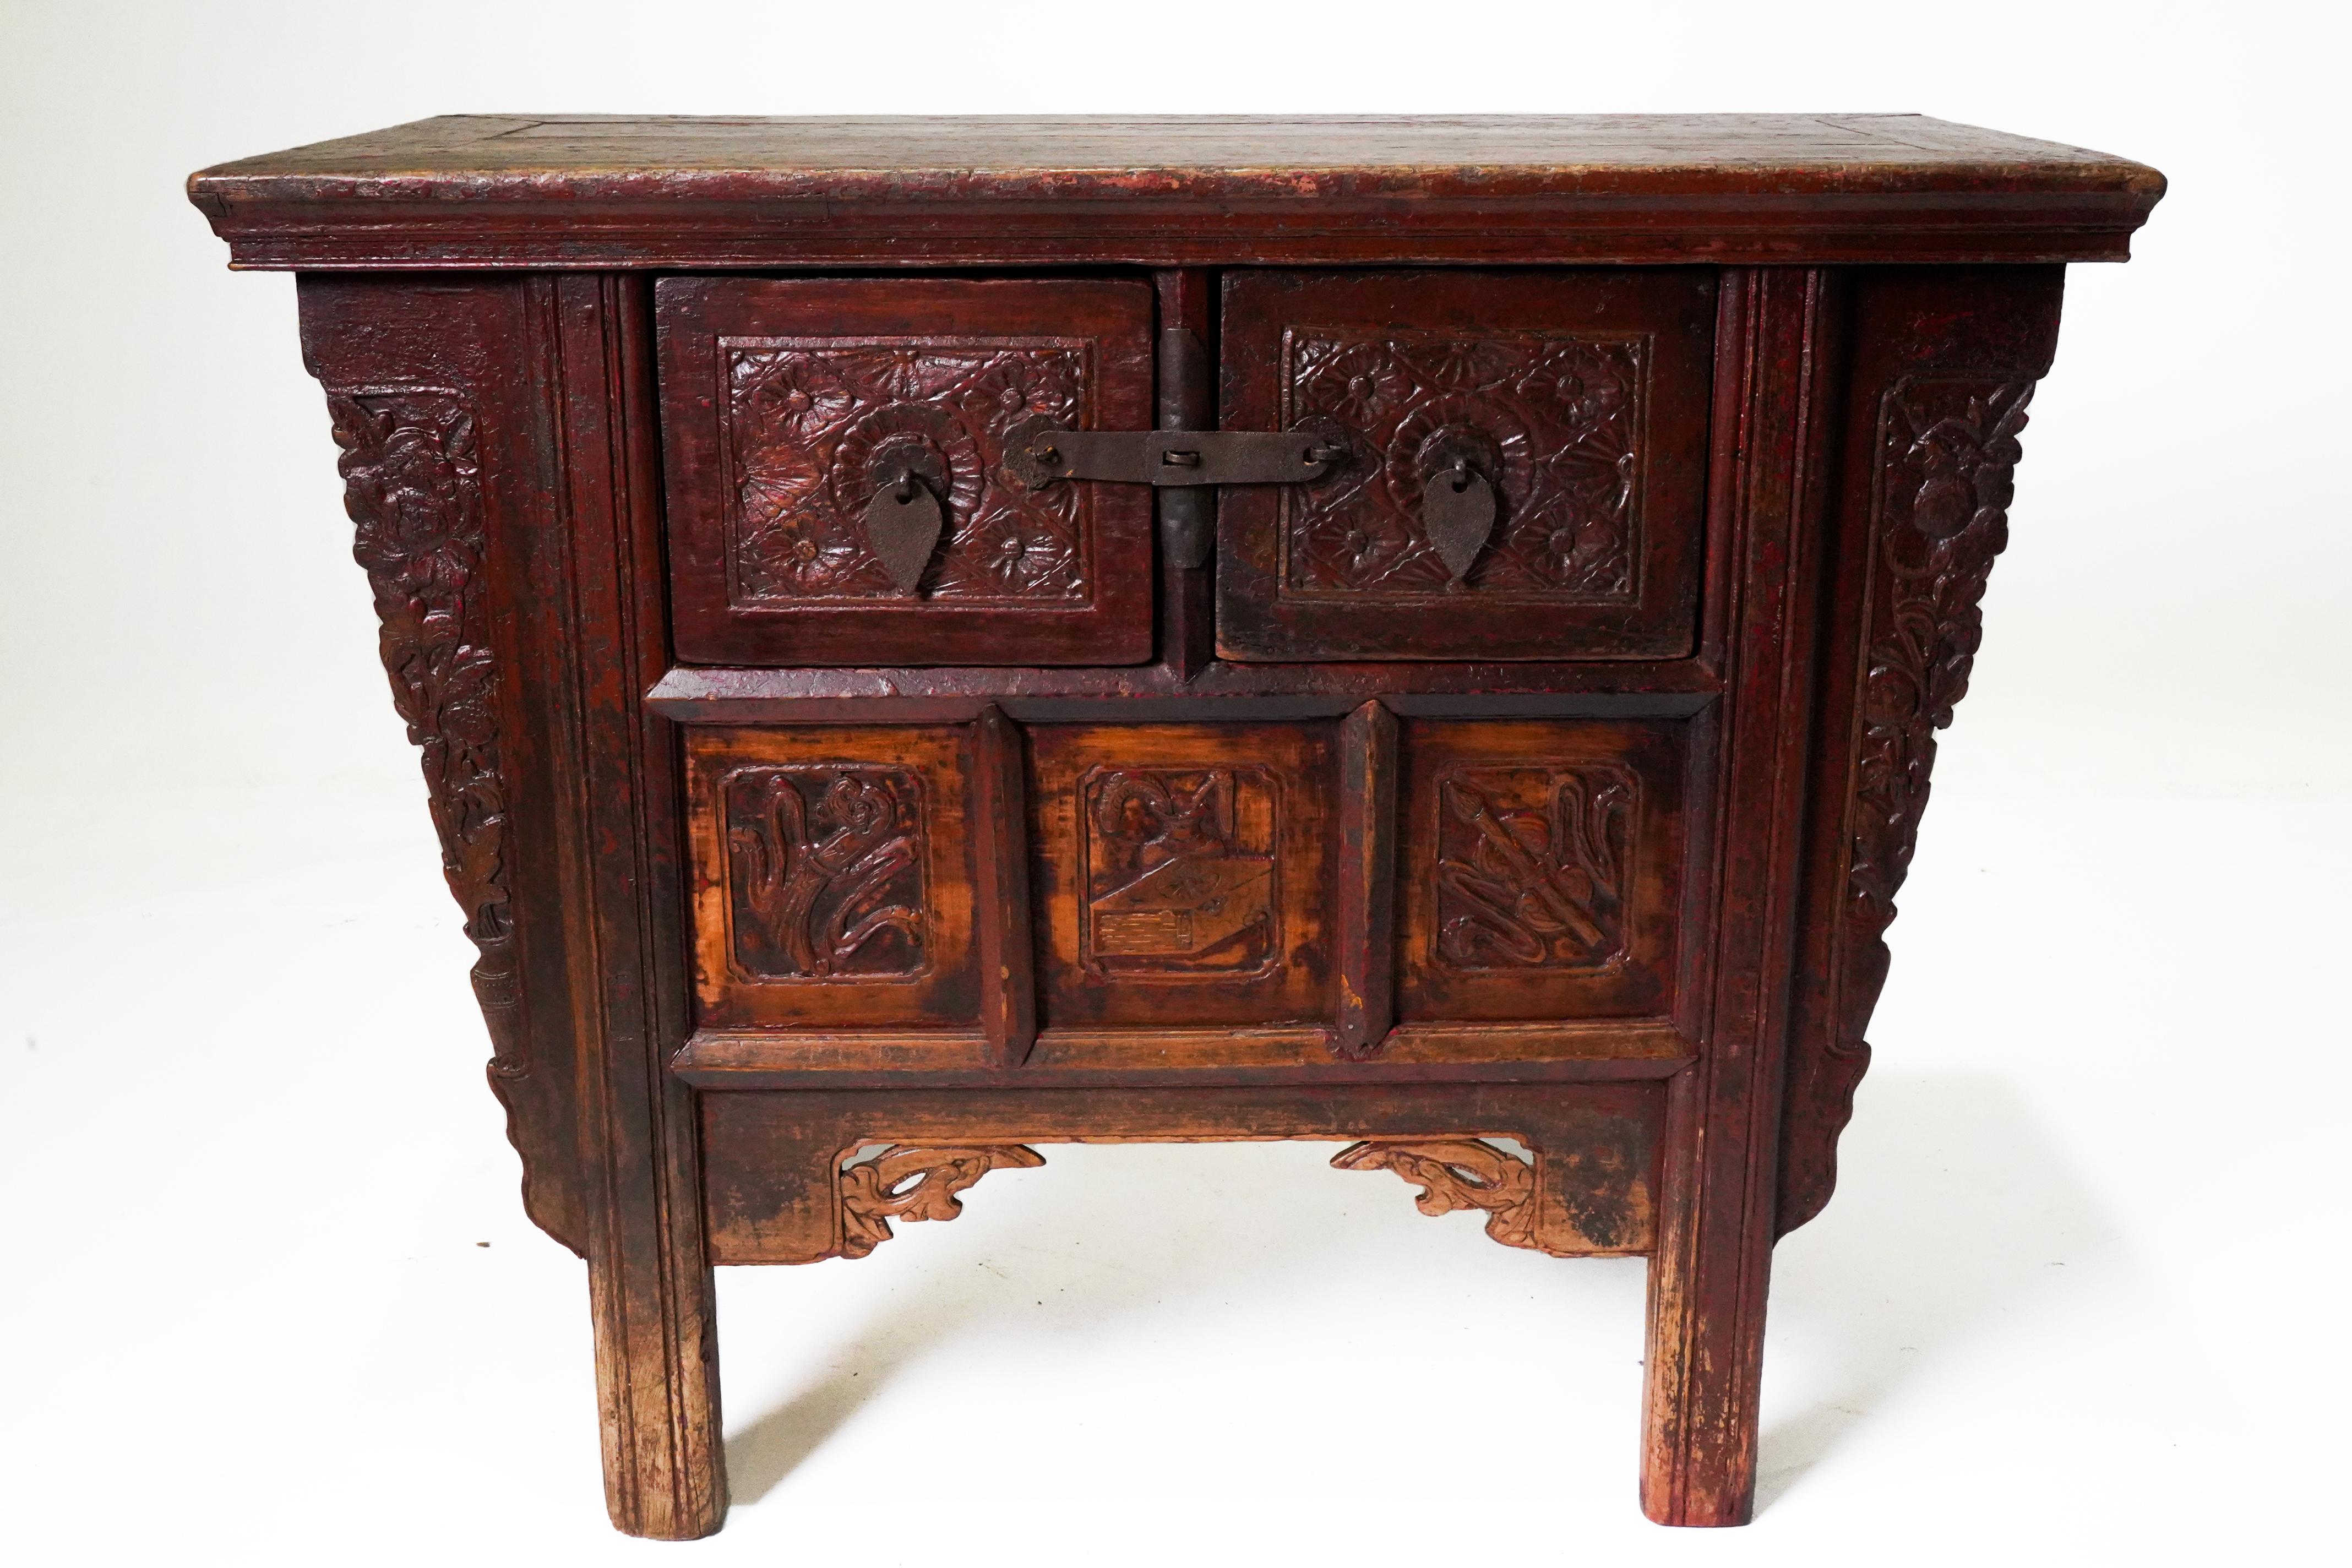 This elegant small coffer features a floating panel top and two drawers sitting above storage area with three carved panels. The front of the drawers and the lower panels are carved with floral rosettes and other auspicious symbols. Carved floral